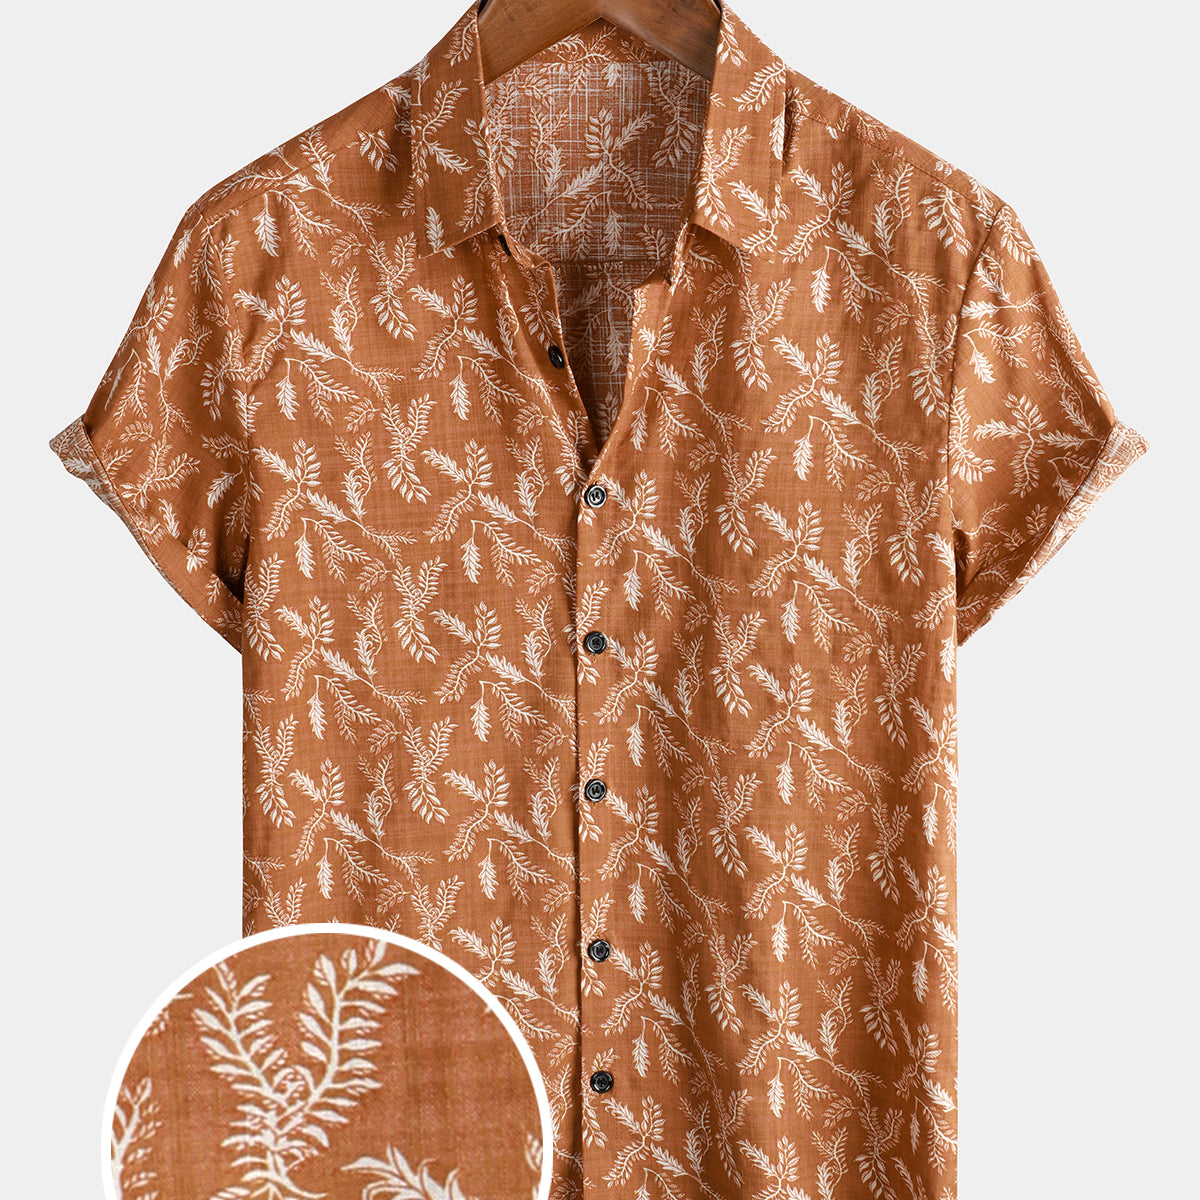 Men's Floral Print Vintage Brown Flower Holiday Cotton Retro Short Sleeve Breathable Button Up Shirt